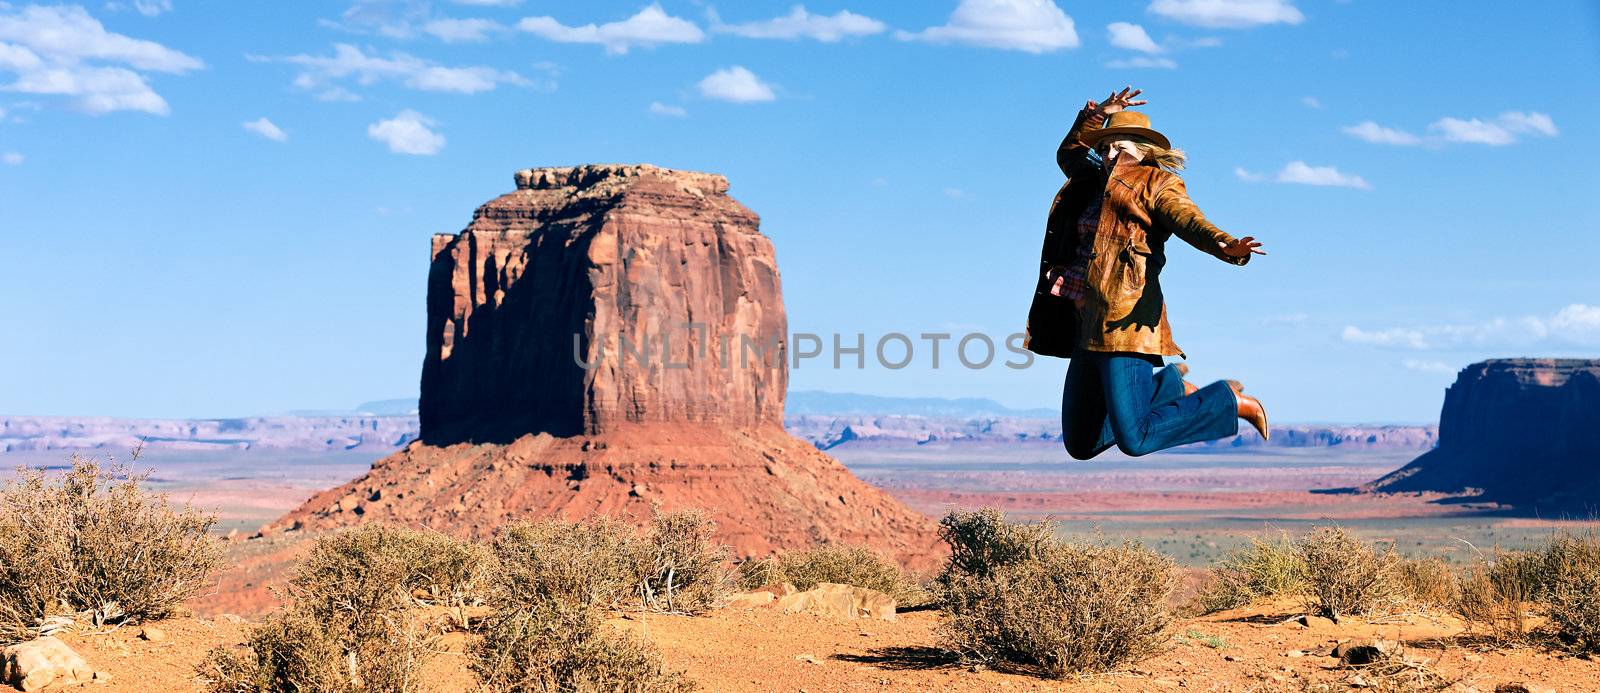 cowgirl jumping in front of Monument Valley by vwalakte